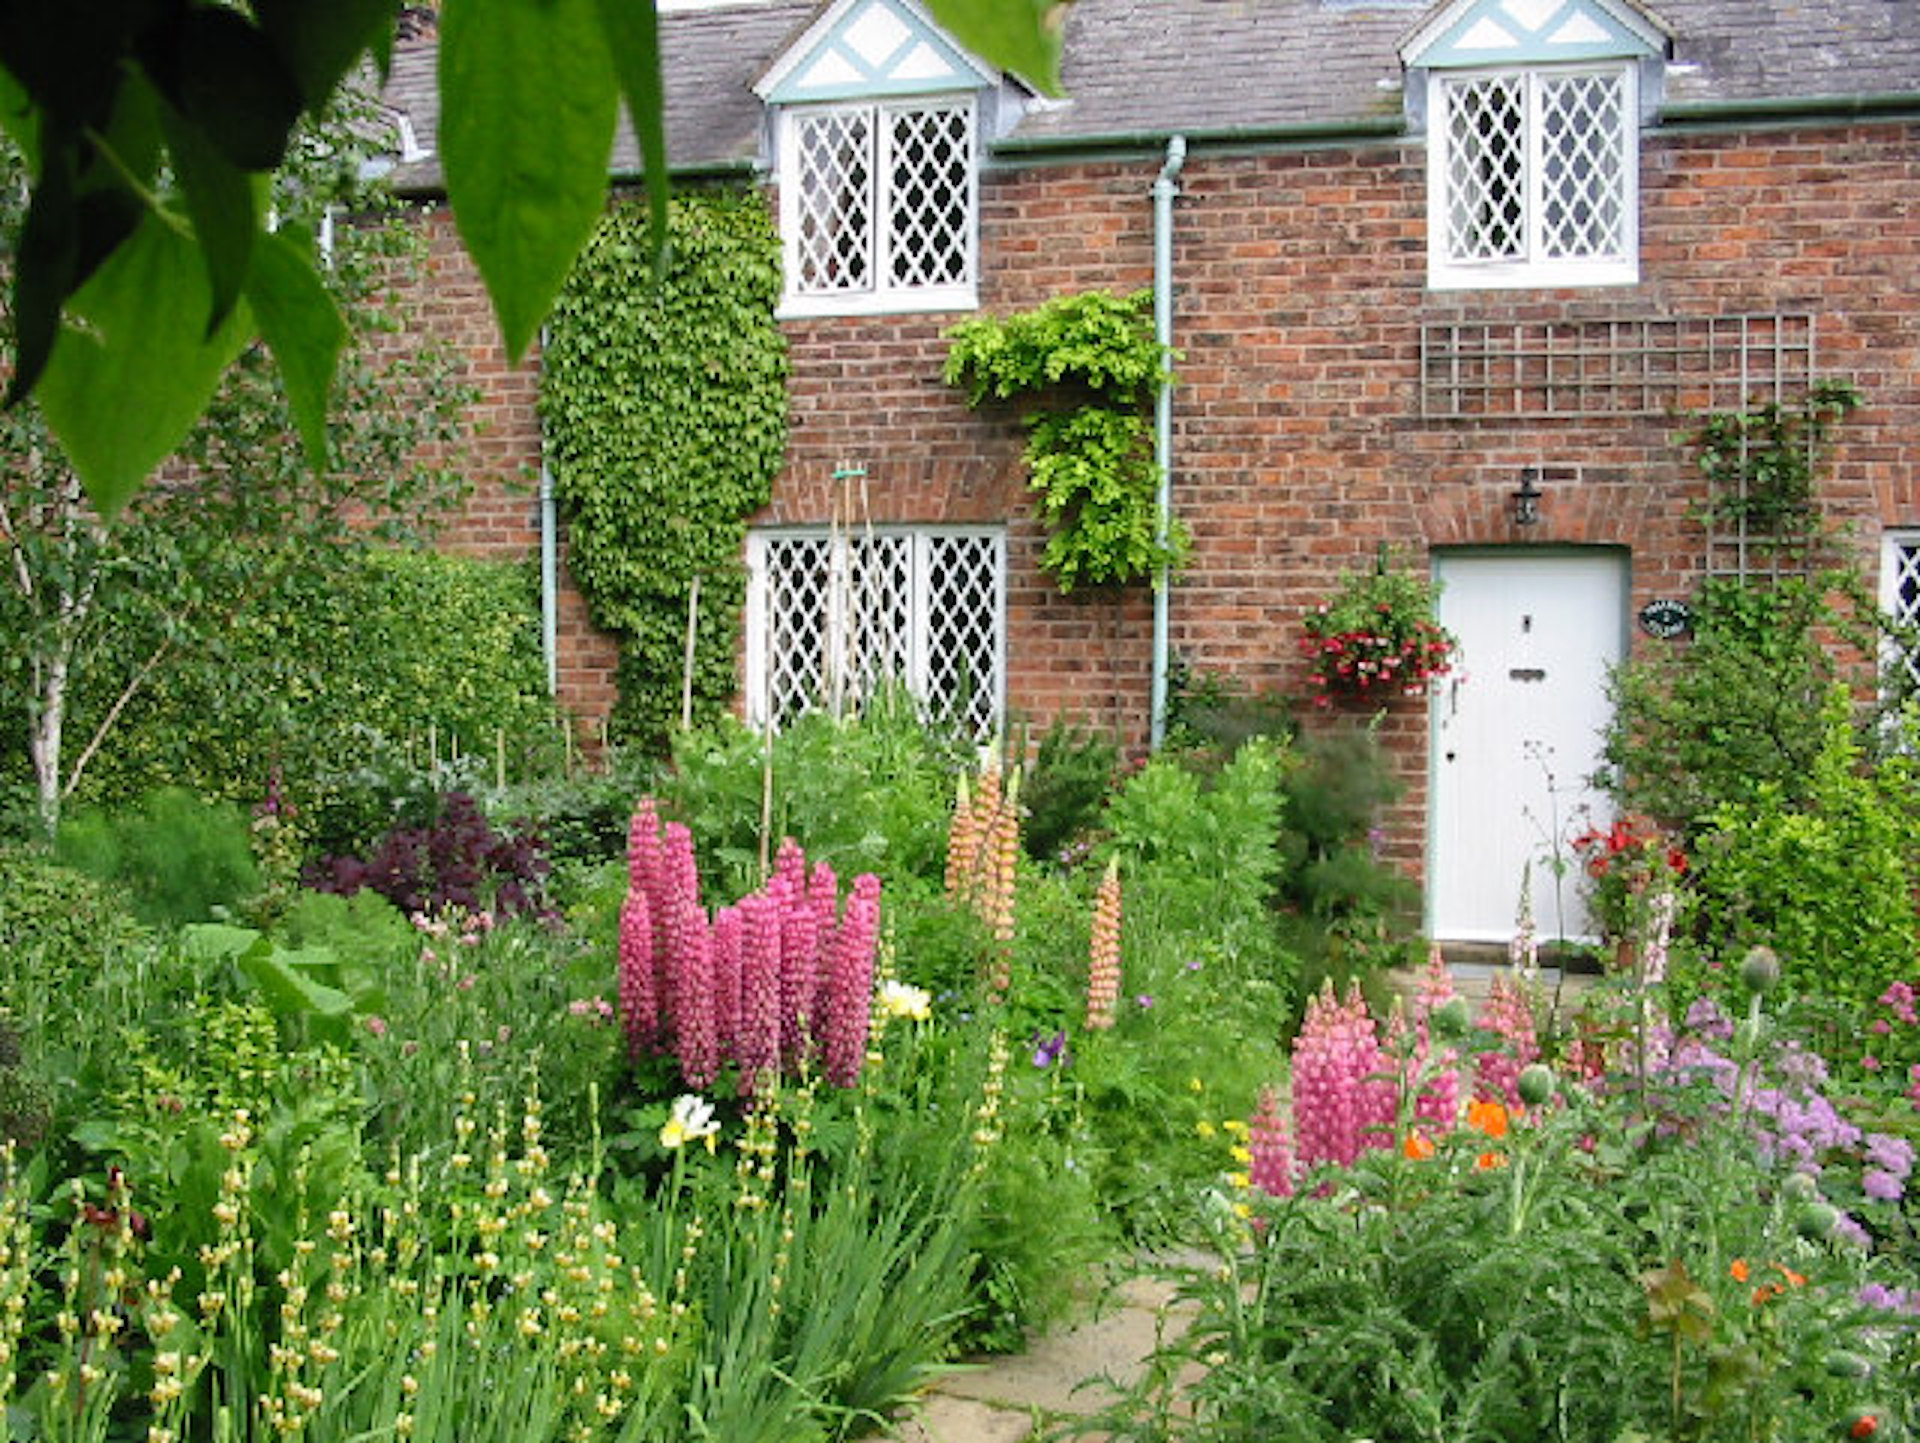 Cottage garden in front of row house.